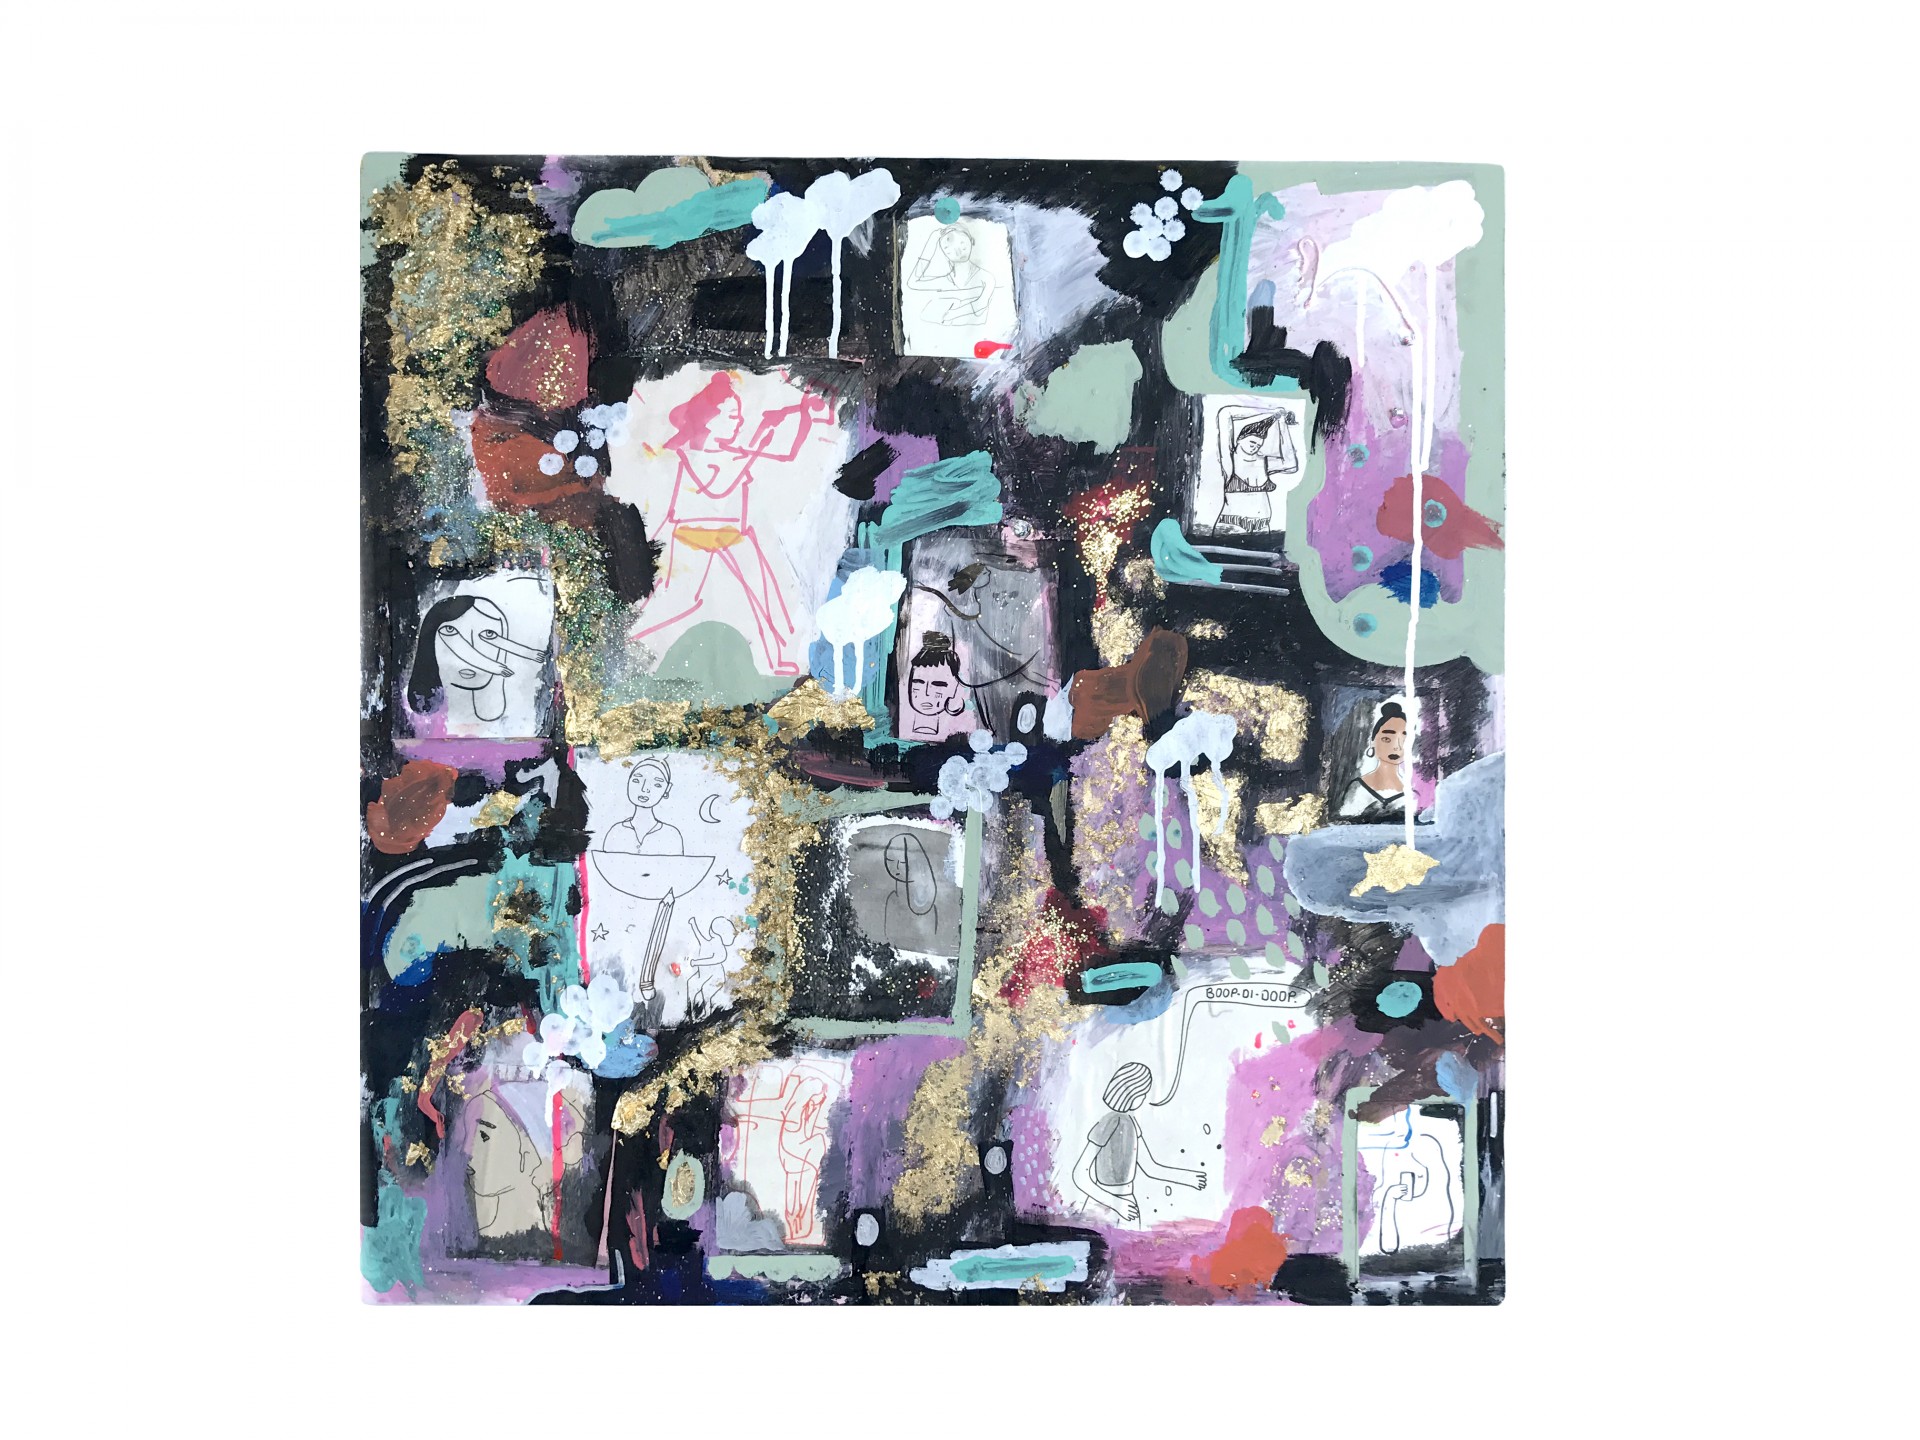 Square painting with collaged self portraits on top. Painting includes black, pink and turquoise paint. 